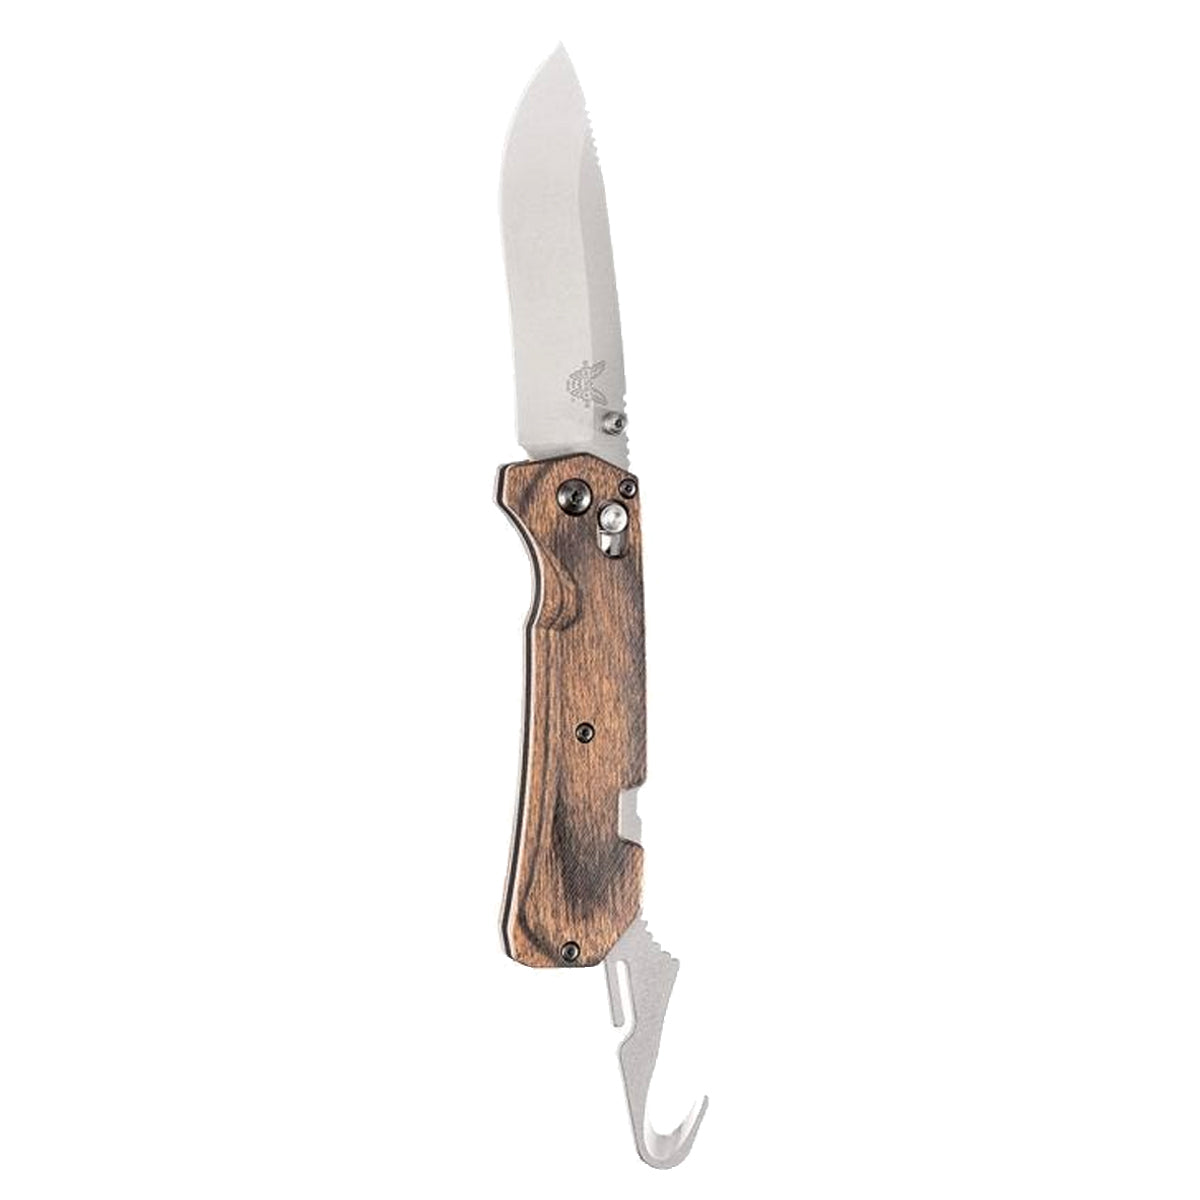 Benchmade Grizzly Creek in  by GOHUNT | Benchmade - GOHUNT Shop